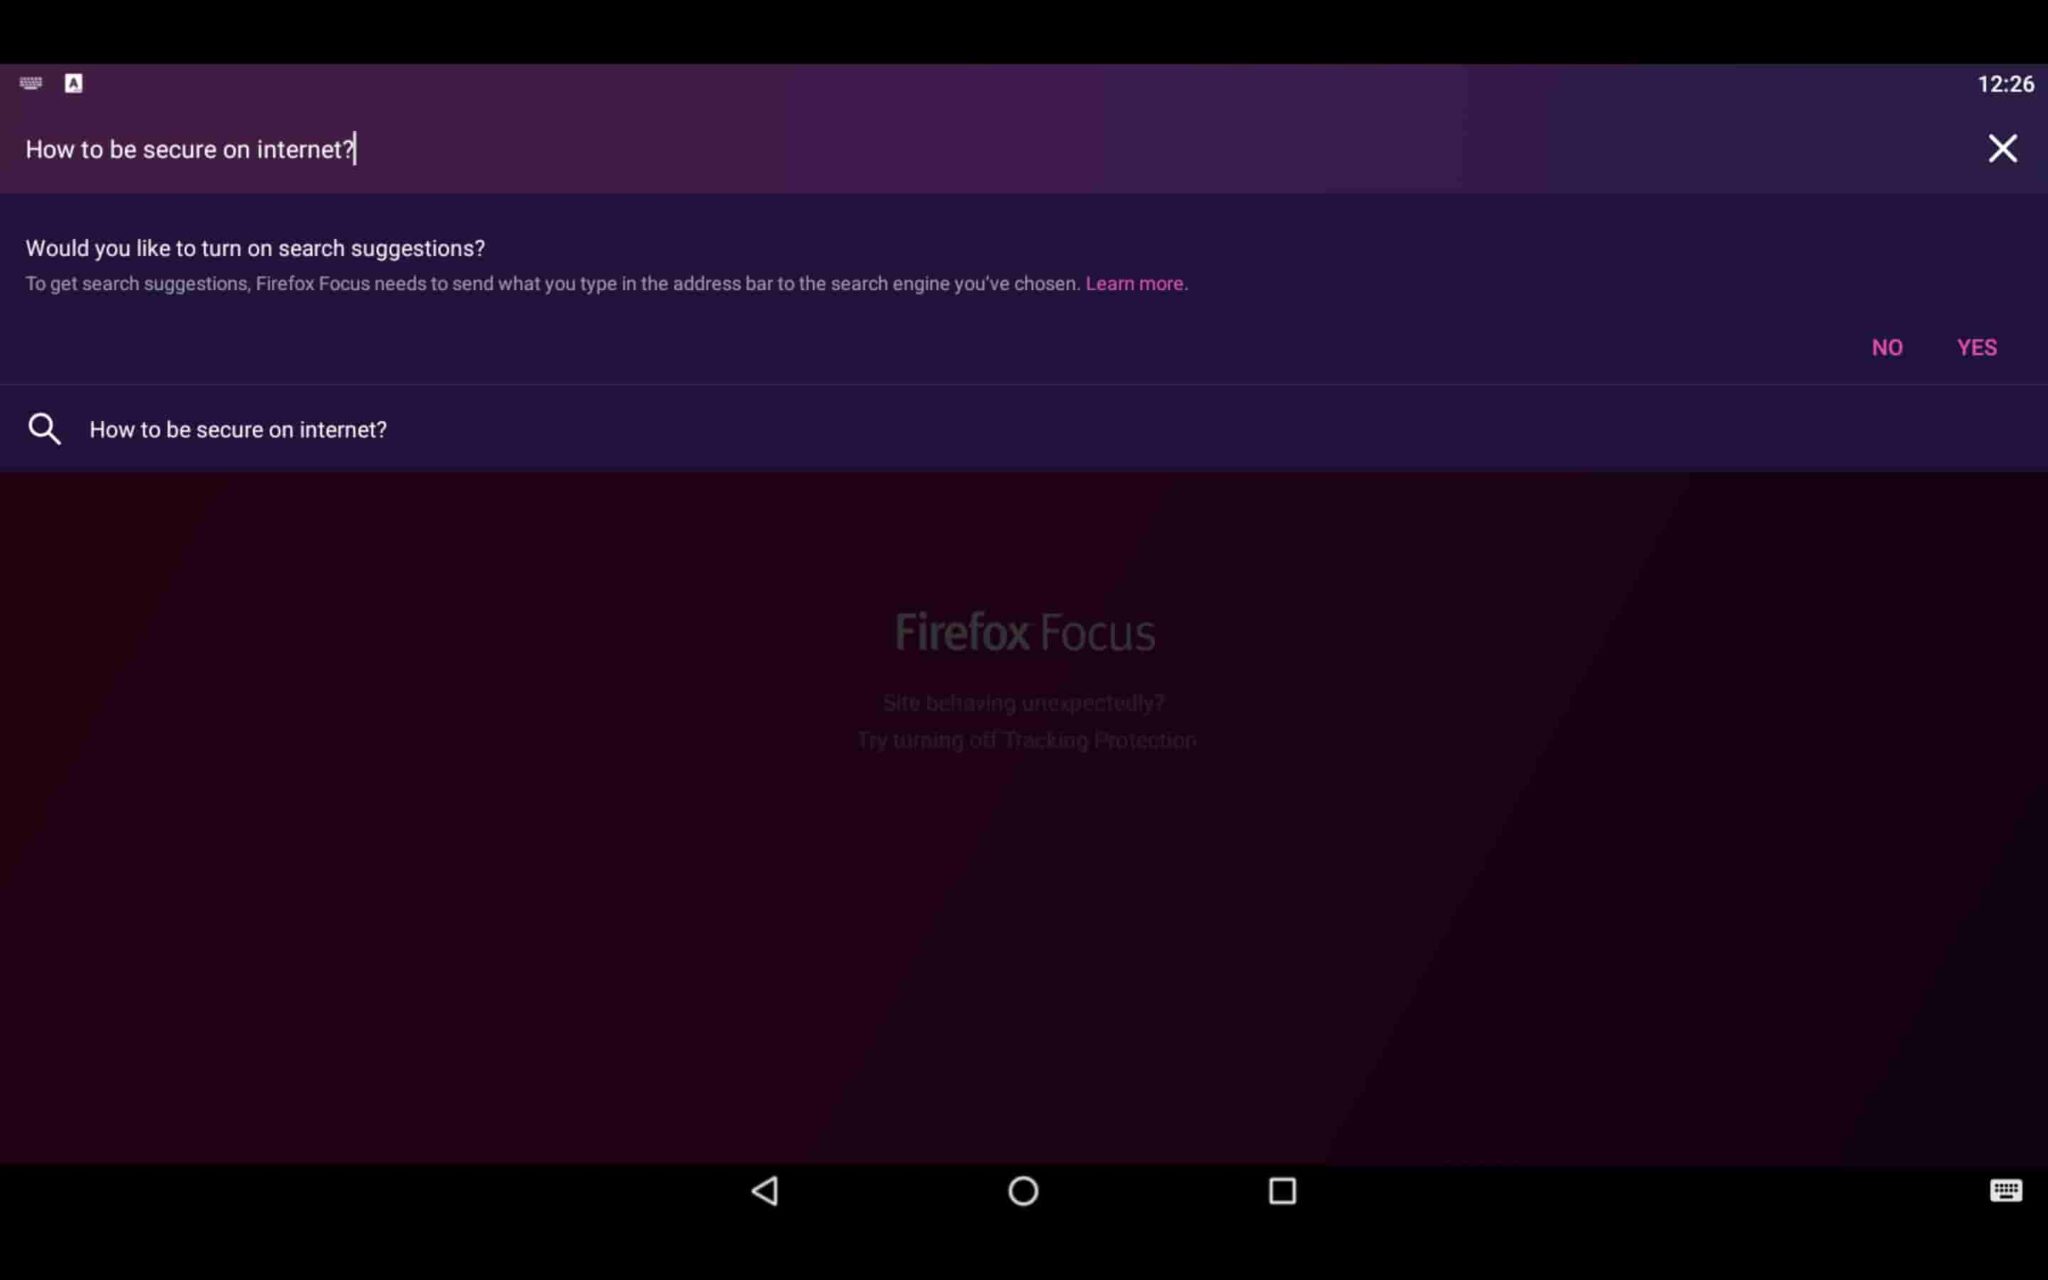 mozilla firefox focus for pc